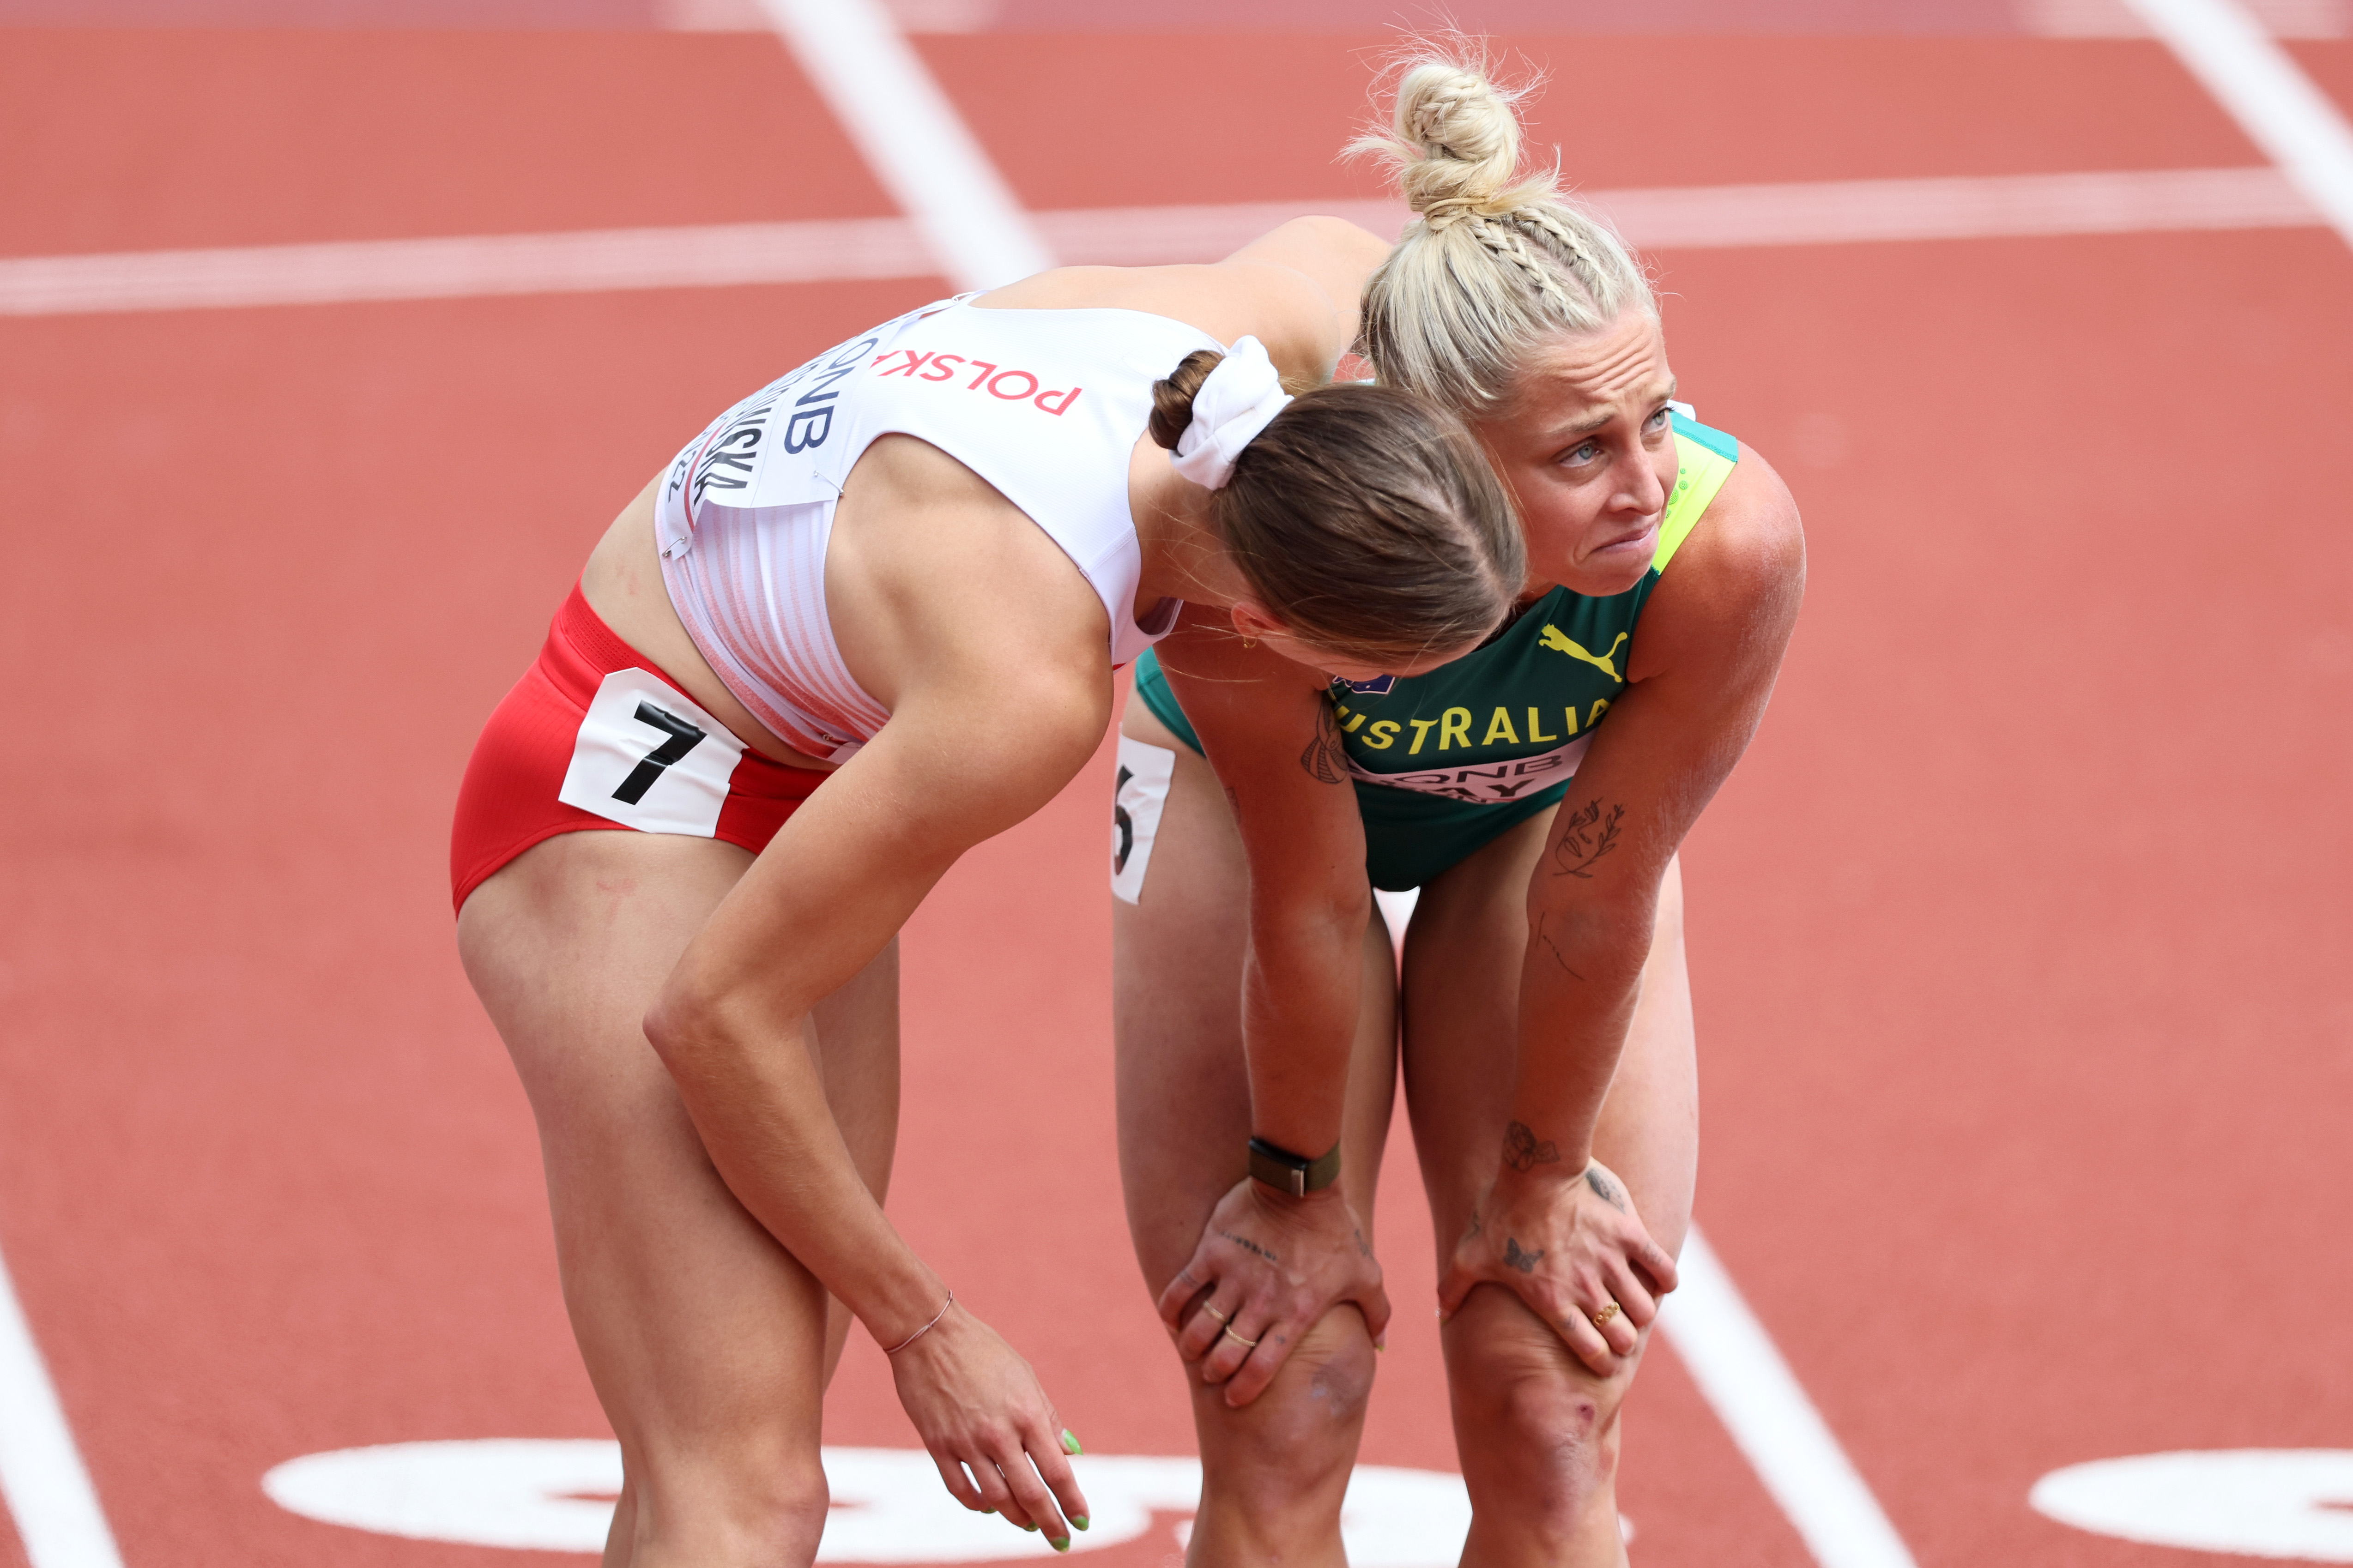 Liz Clay is consoled by Poland's Pia Skrzyszowska after injuring her foot.